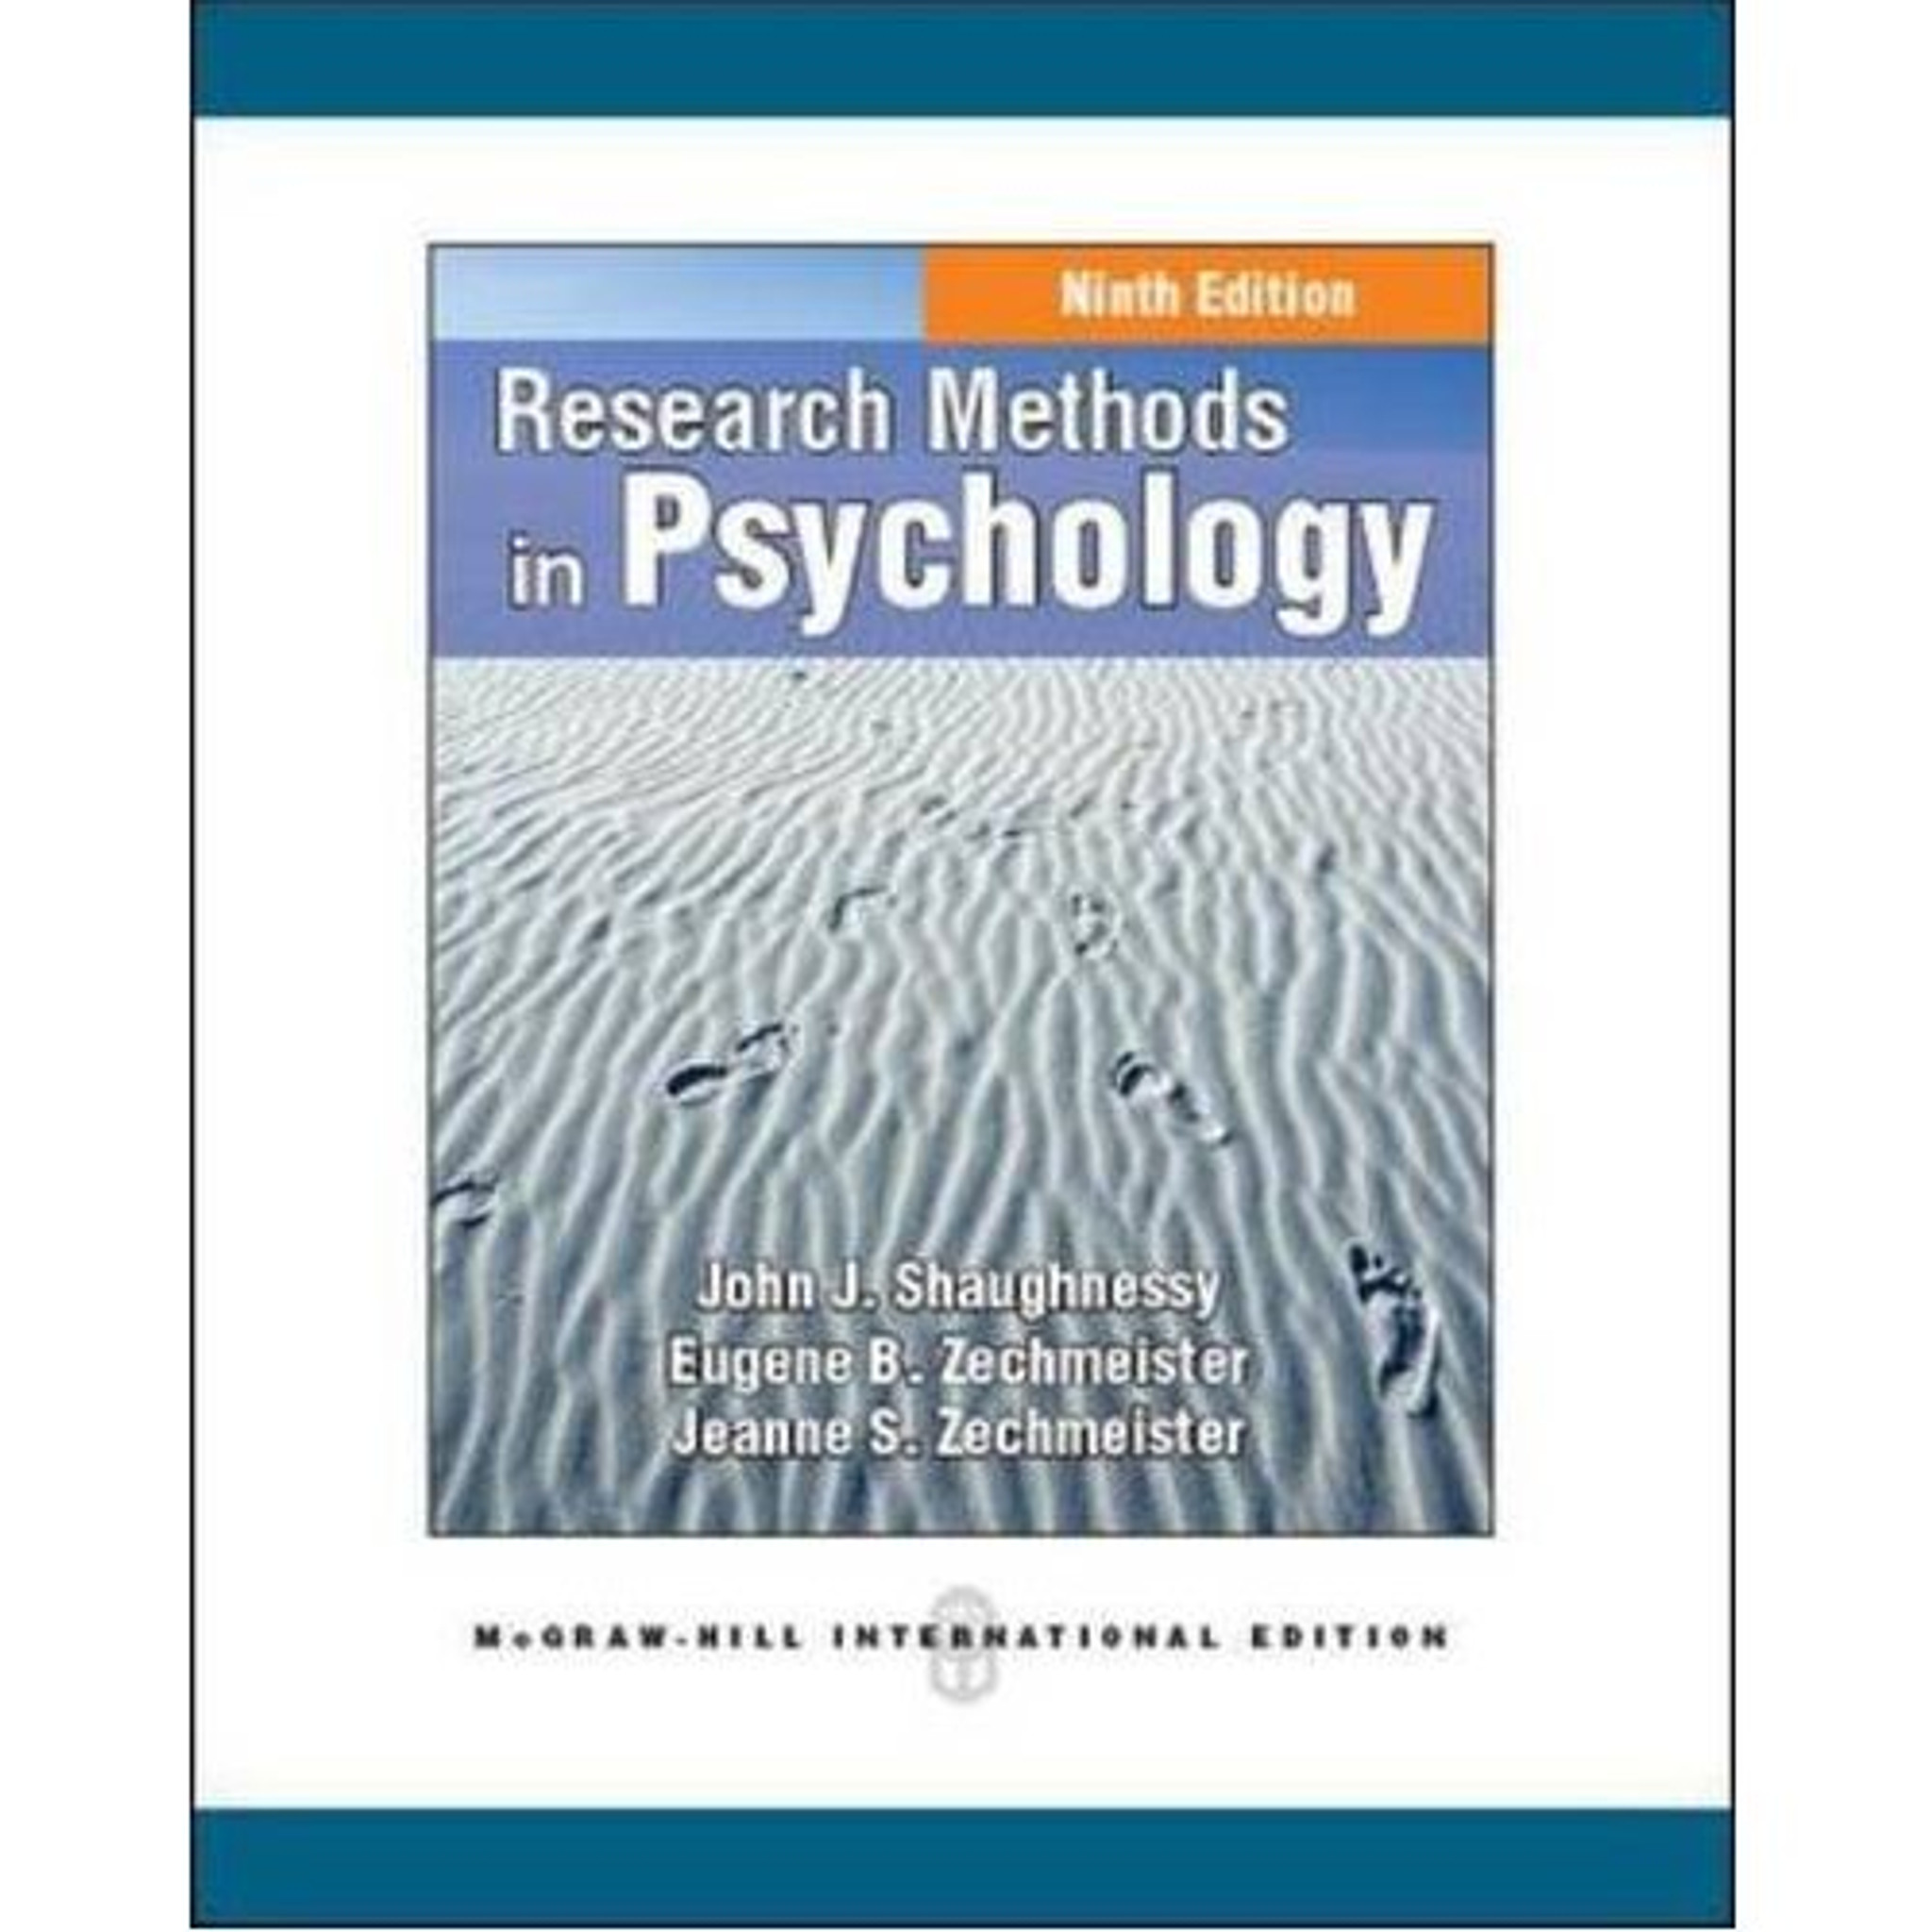 research methods in psychology course